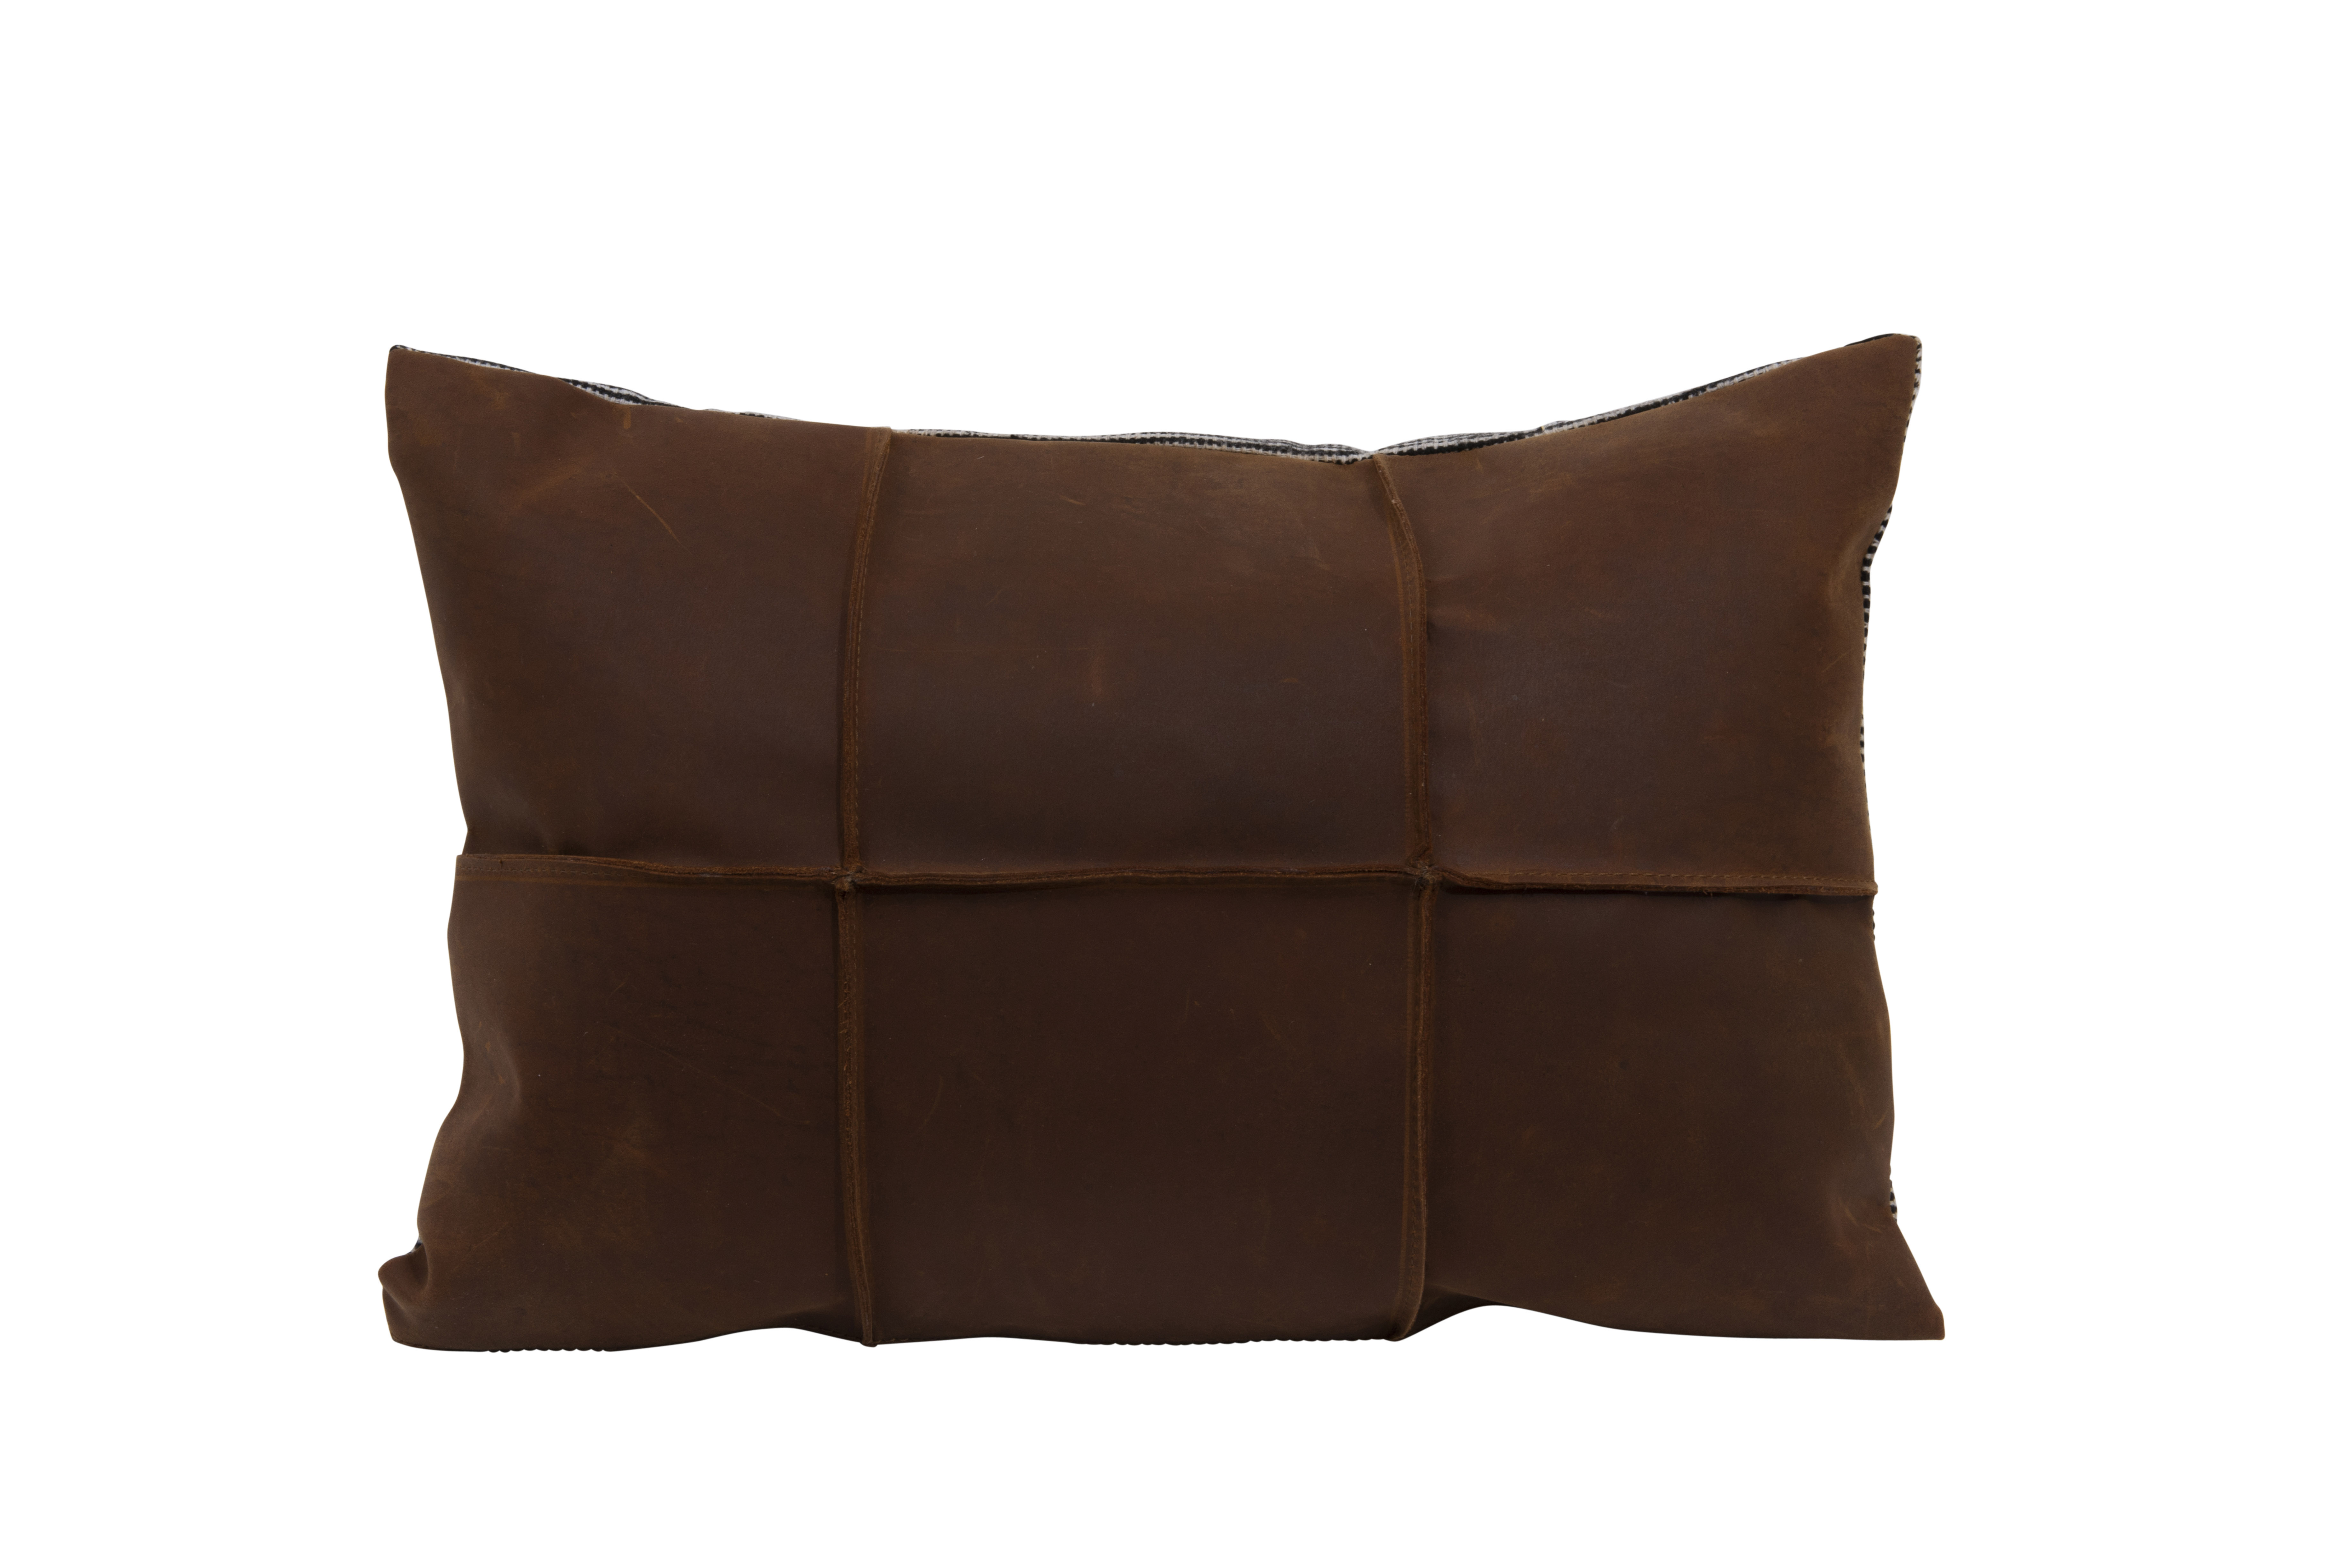 Brown Leather Pillow With Black White, White Leather Pillows